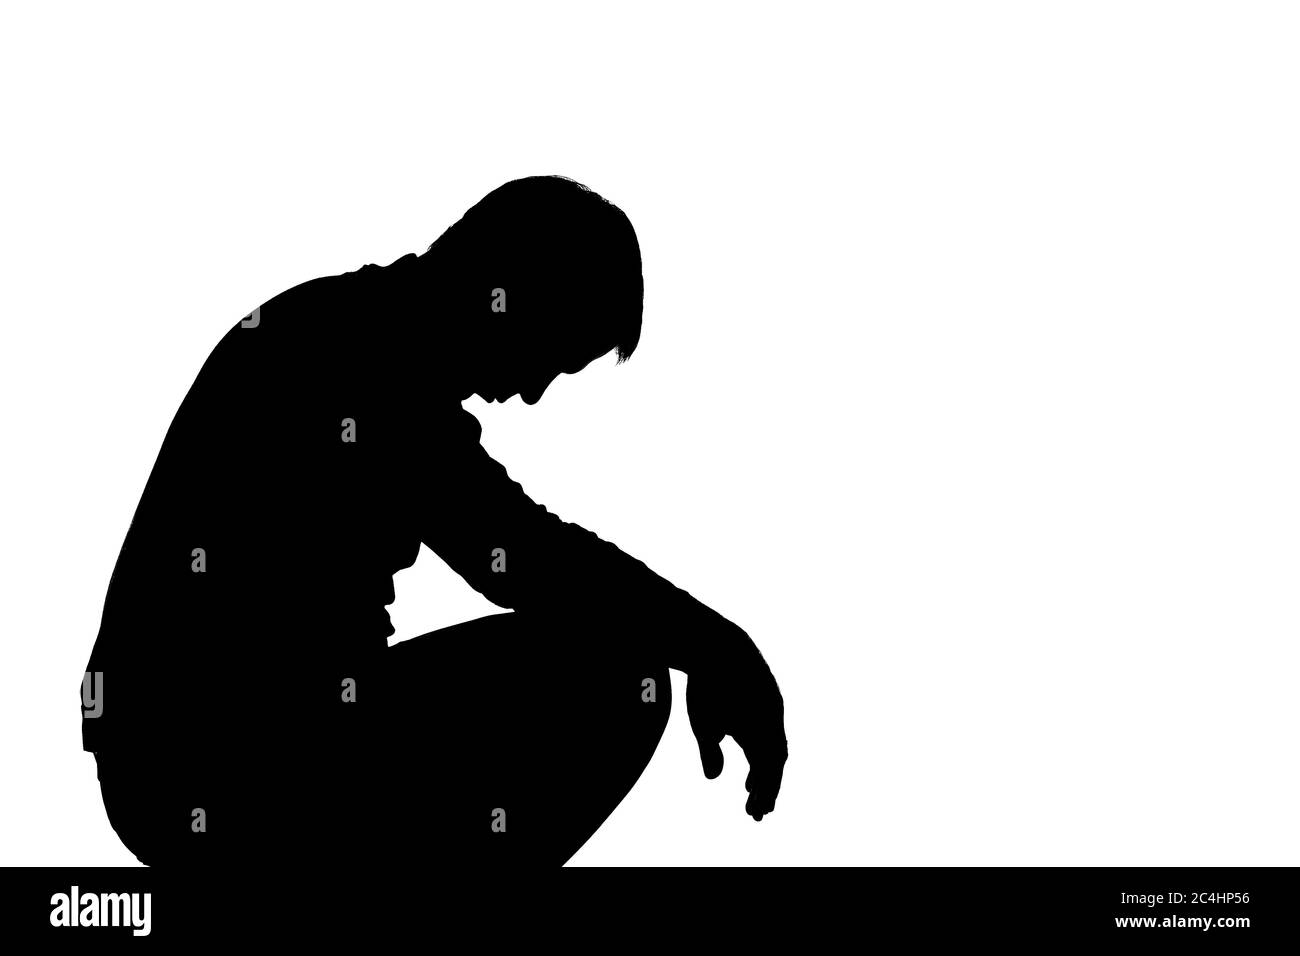 Young man with grief dropped his arms - dark silhouette Stock Photo